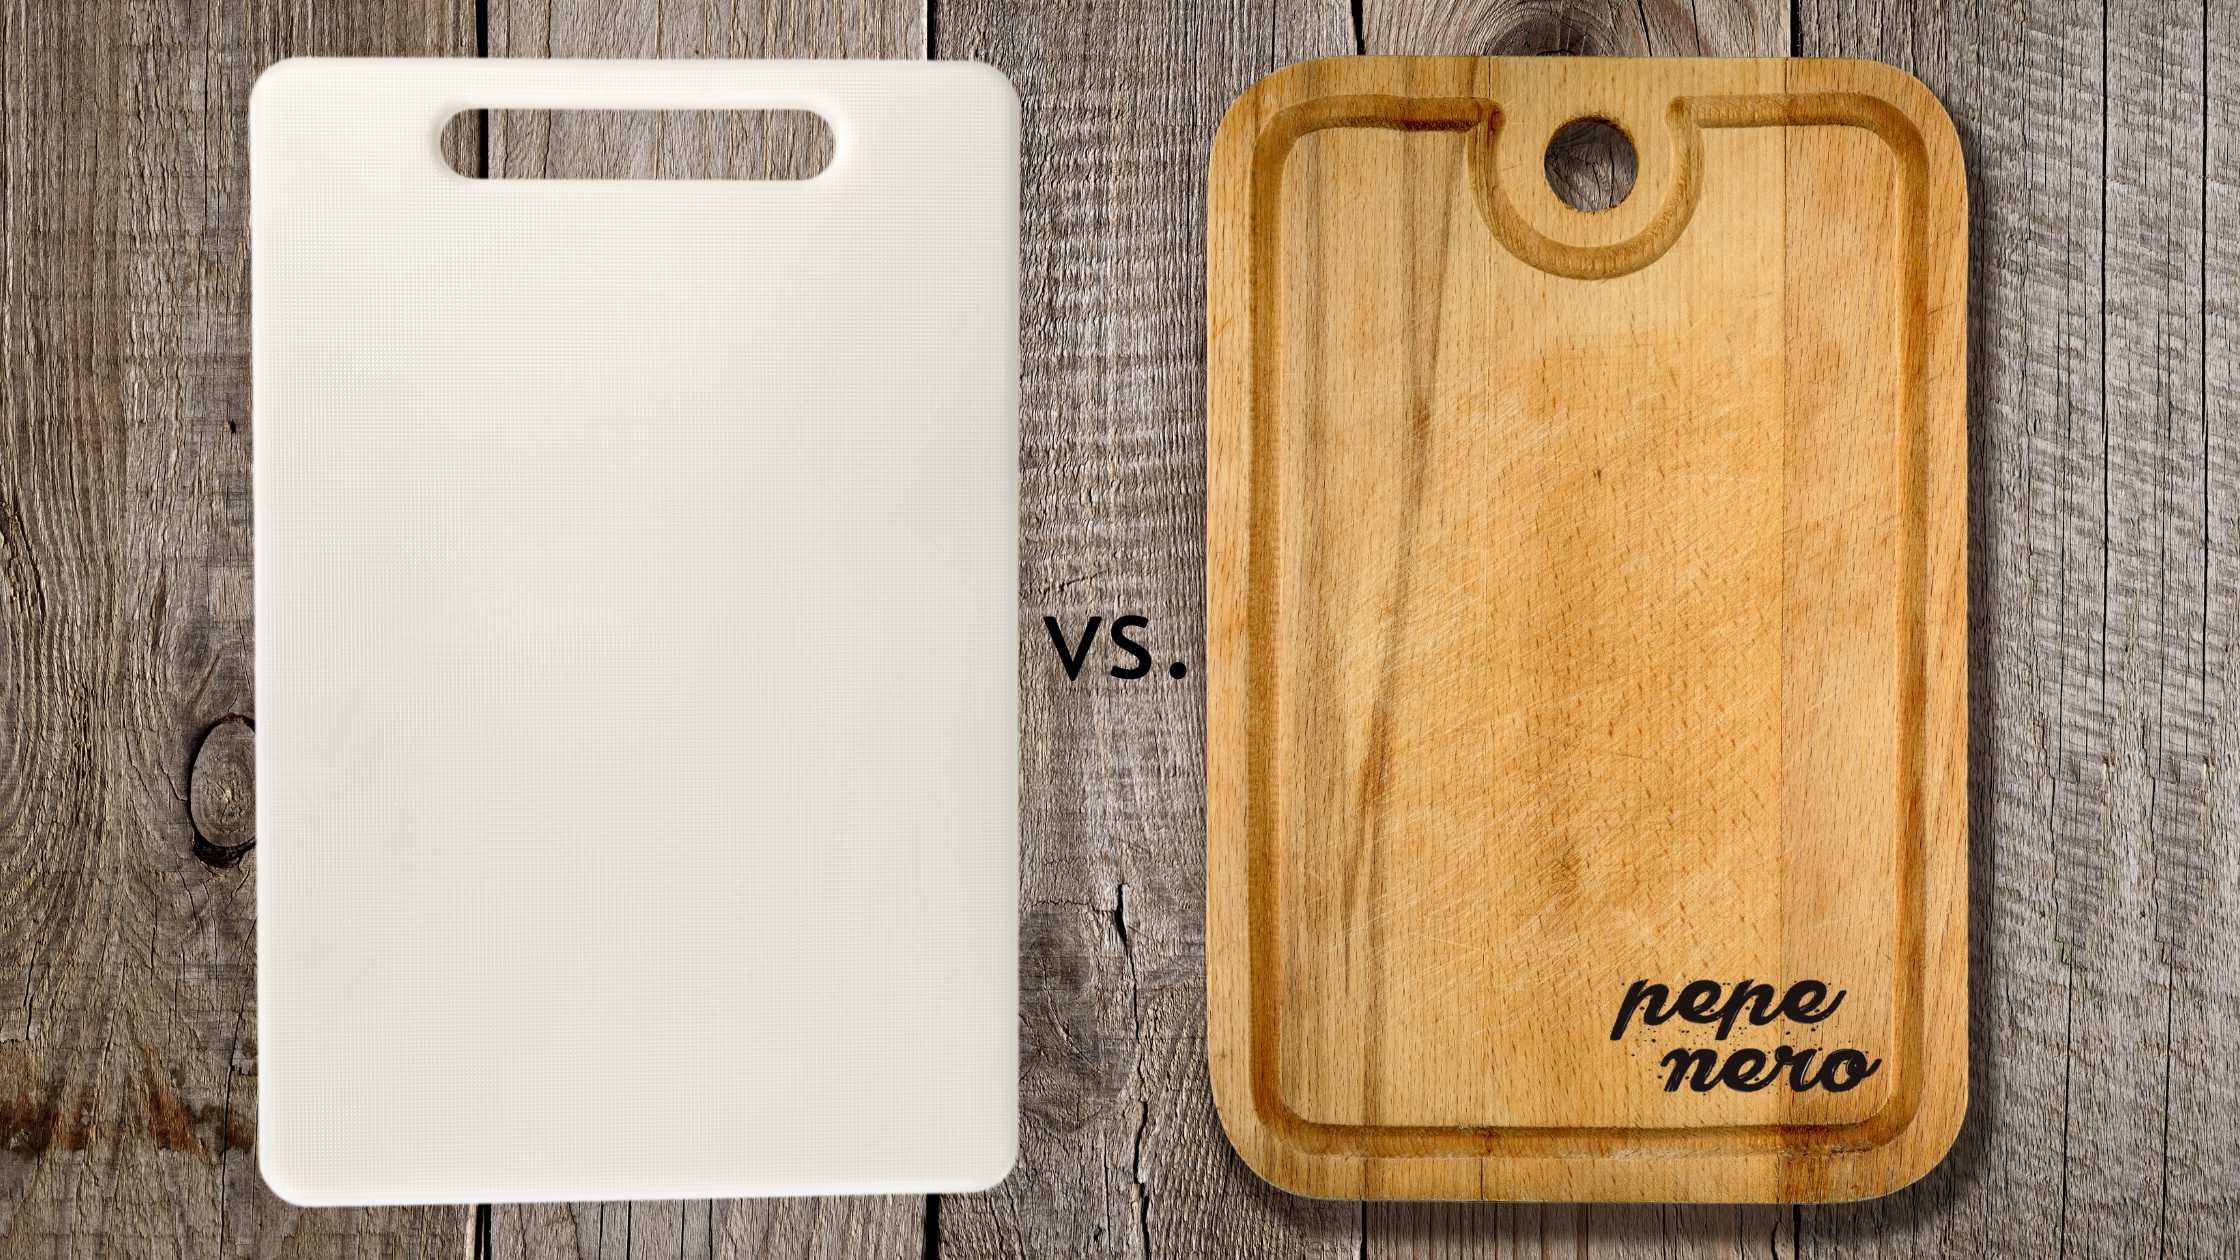 Which Type of Cutting Board is the Safest - Plastic or Wood?